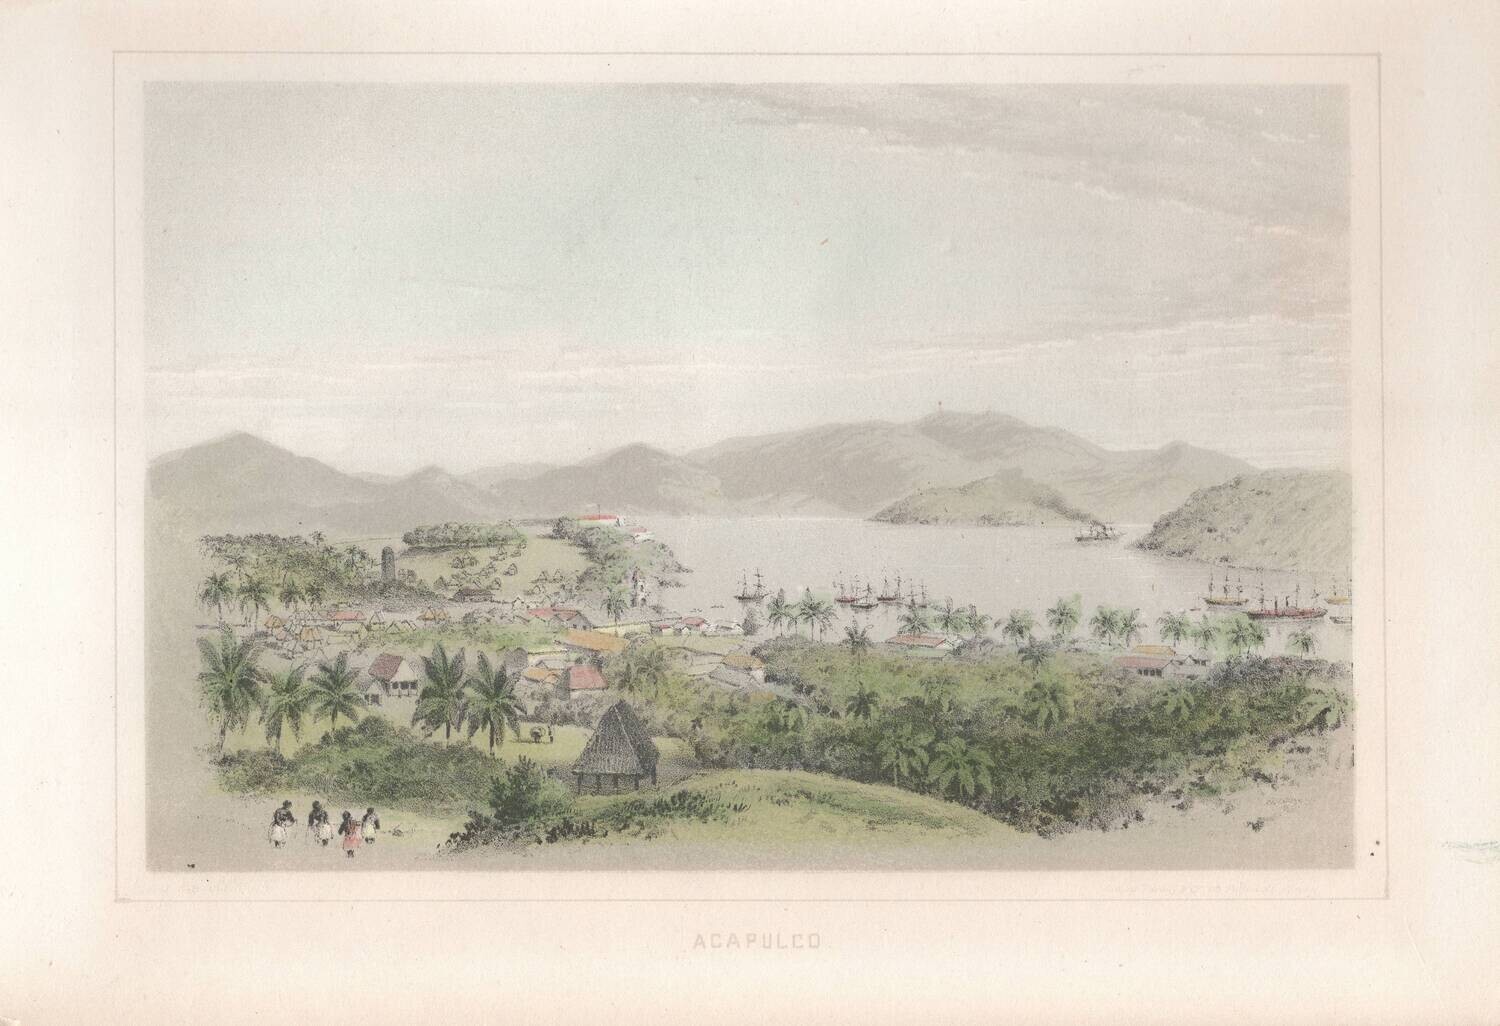 1840 Acapulco View , a Lithograph w/ Hand Color by PS Duval